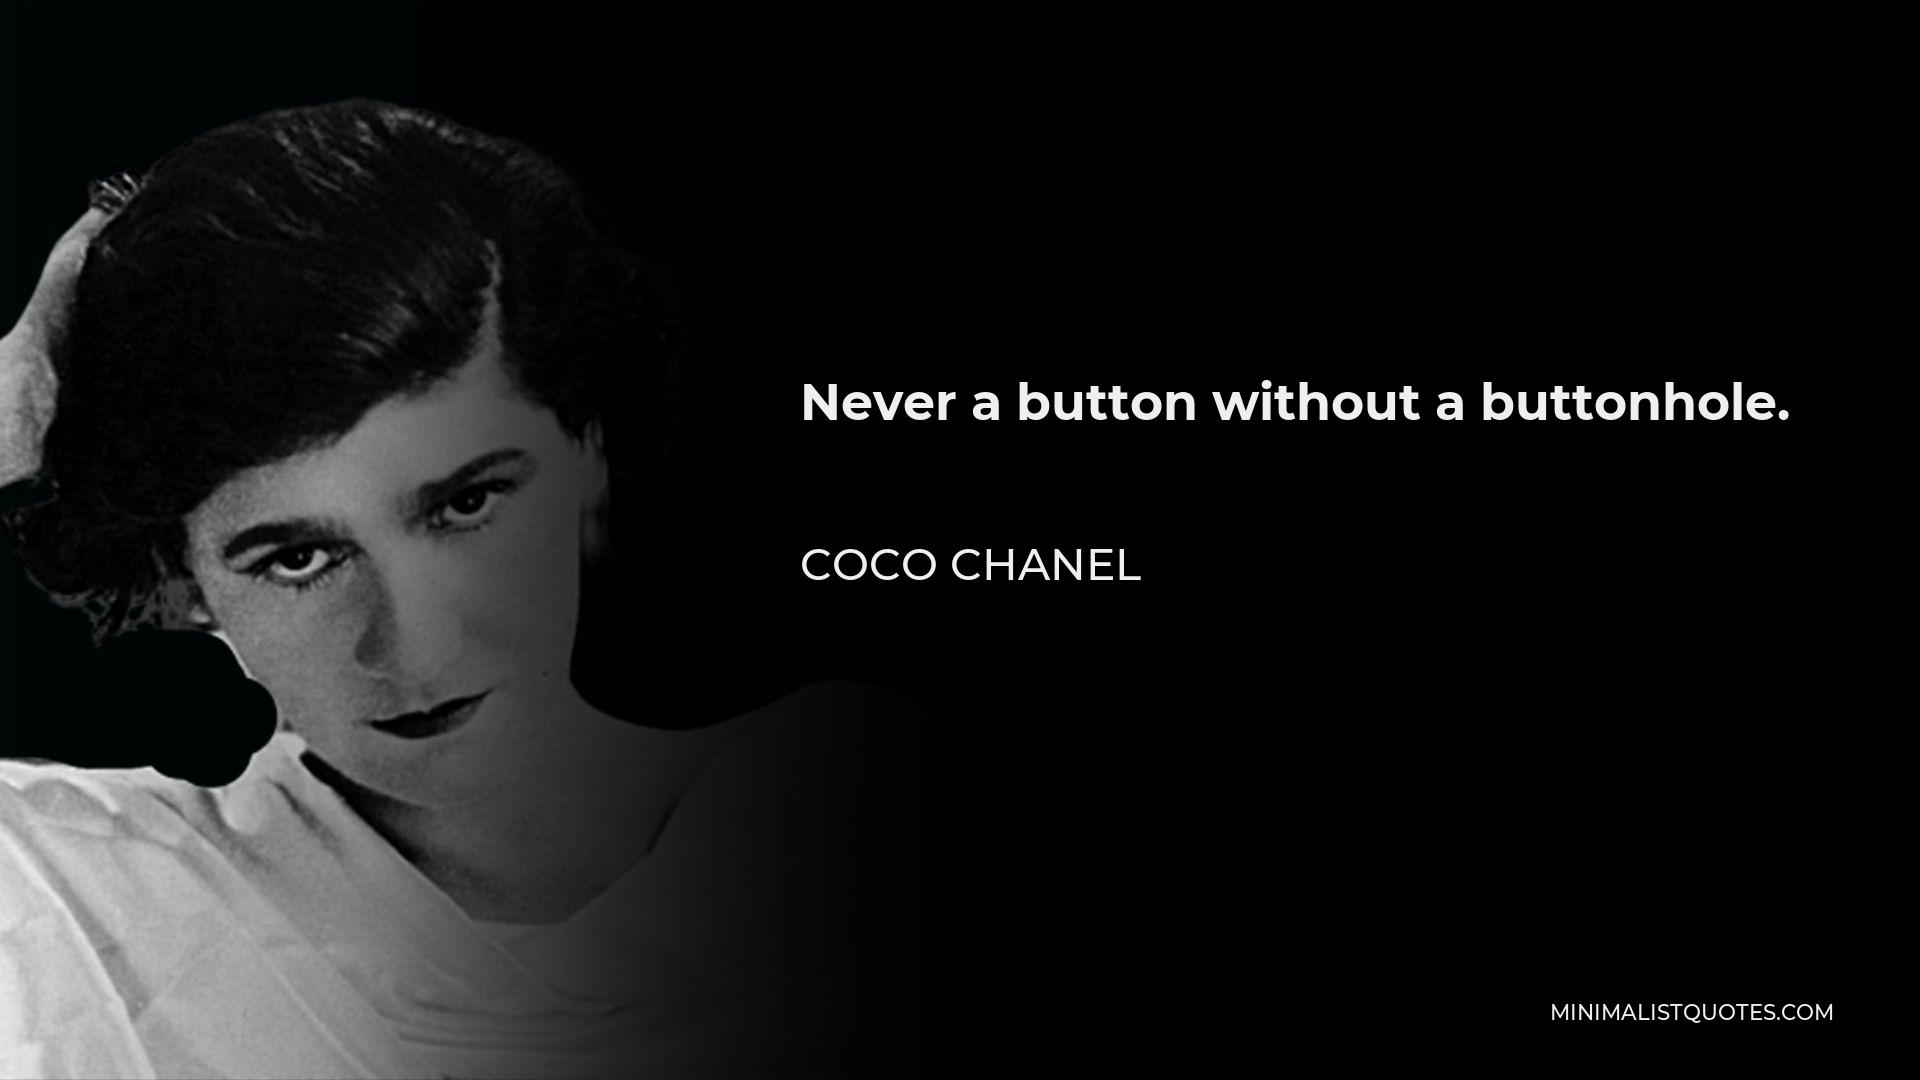 Coco Chanel Quote - Never a button without a buttonhole.